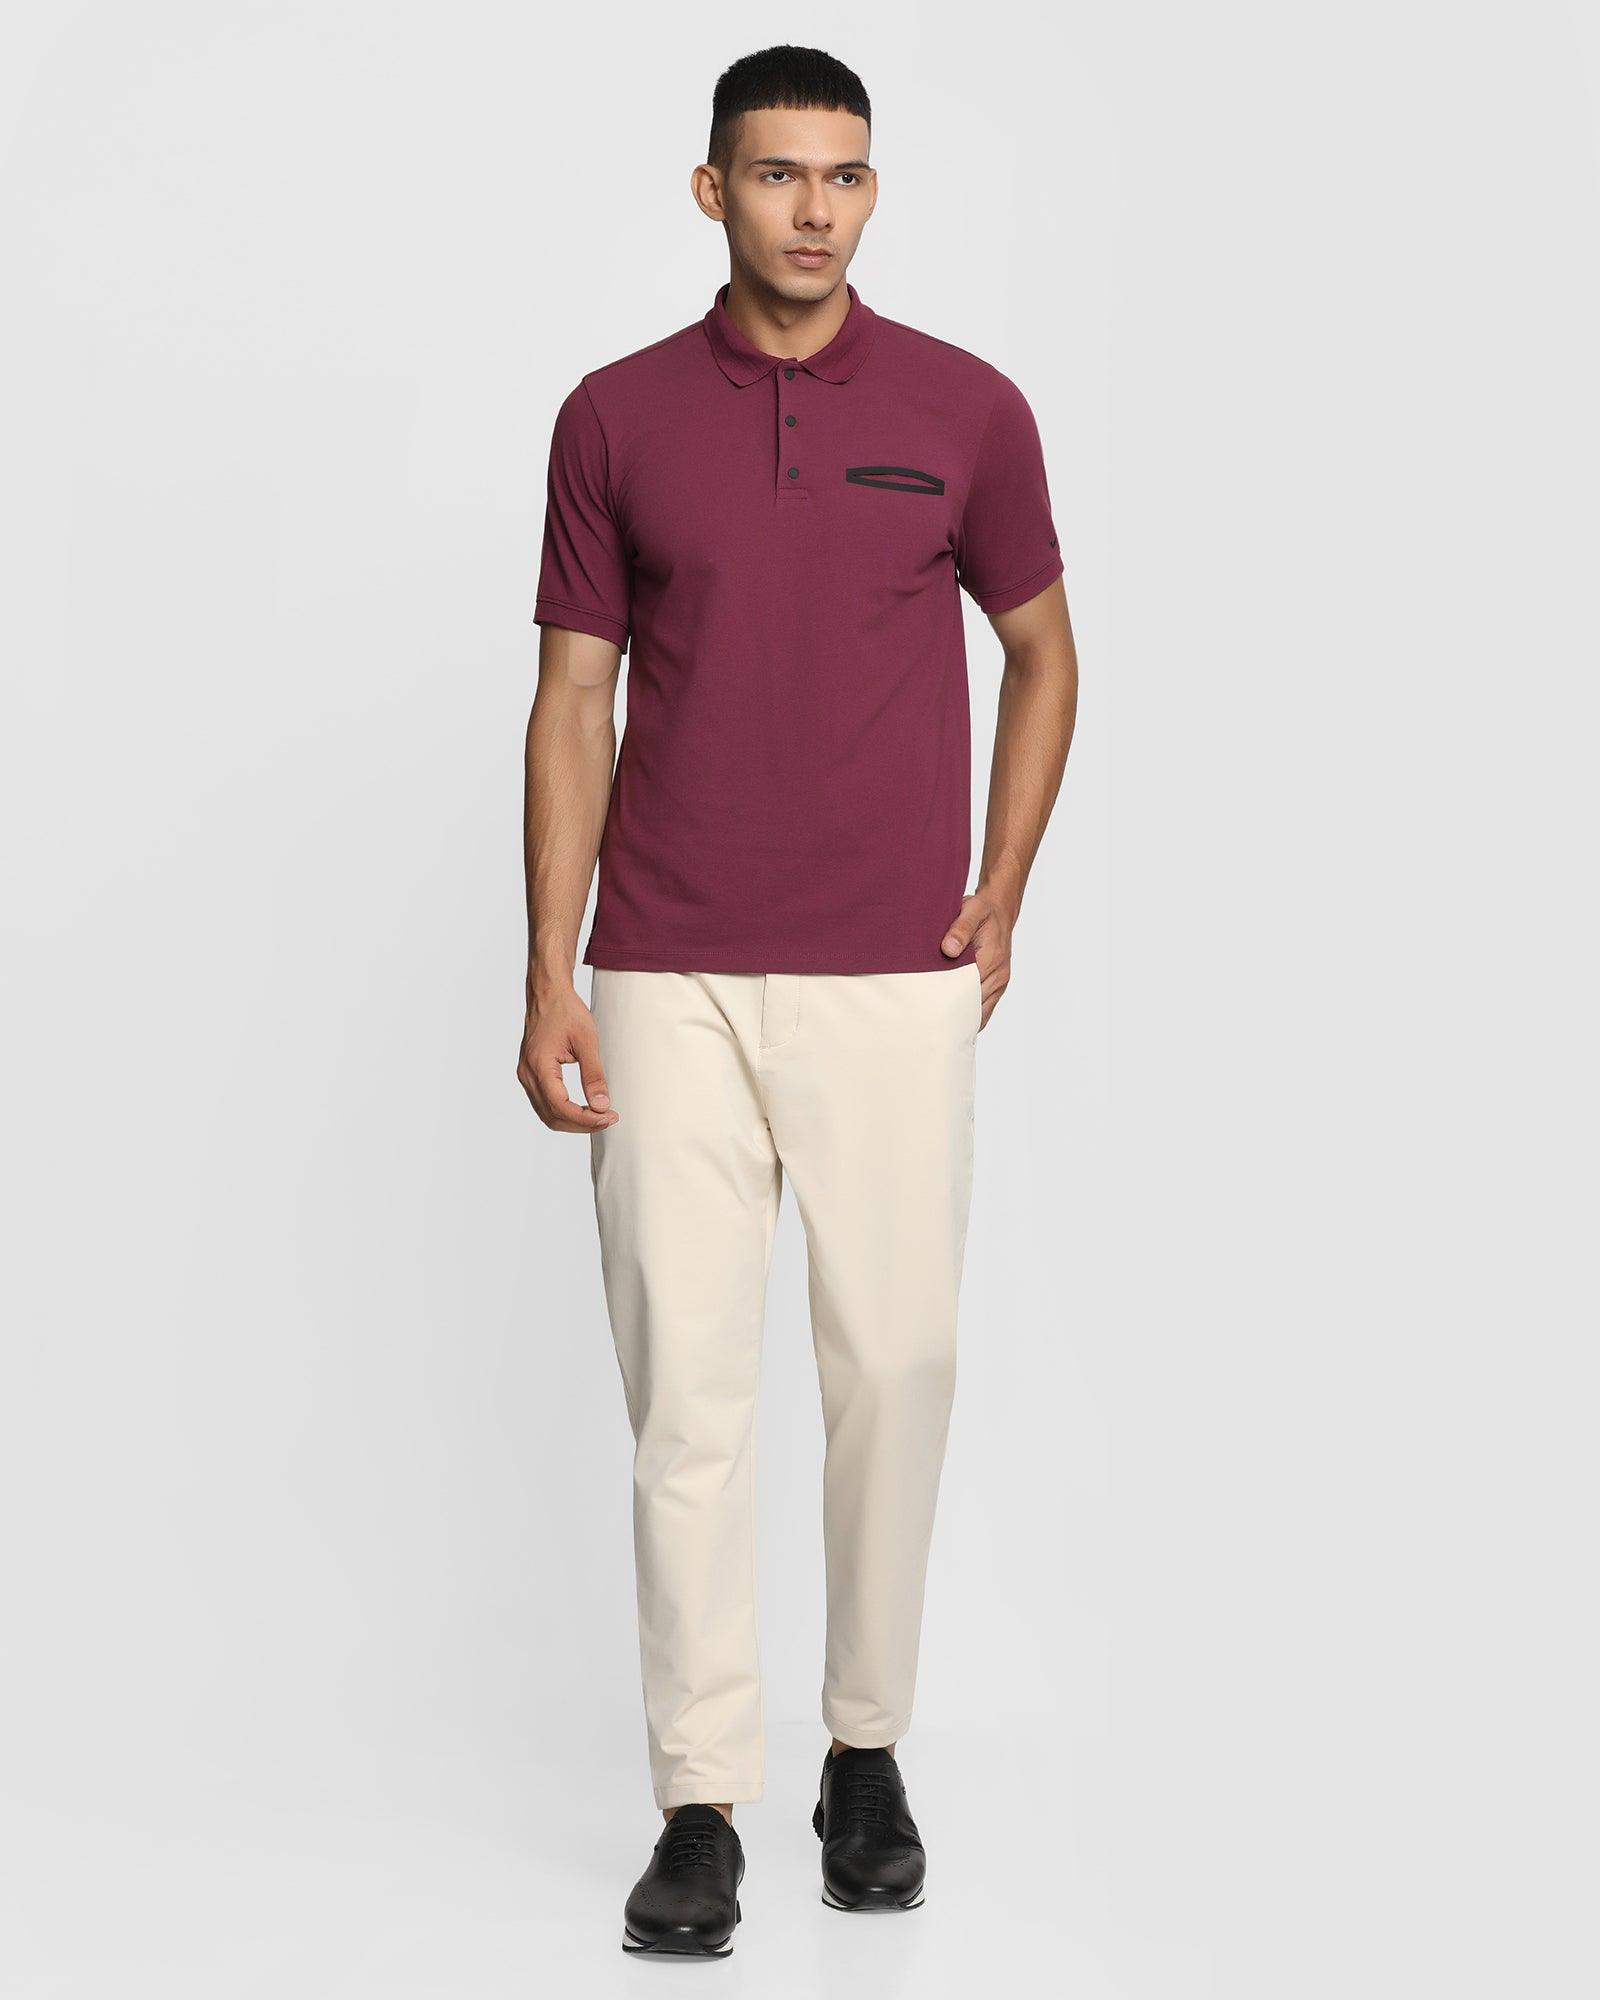 TechPro Nadal Casual Beige Textured Khakis - Hector